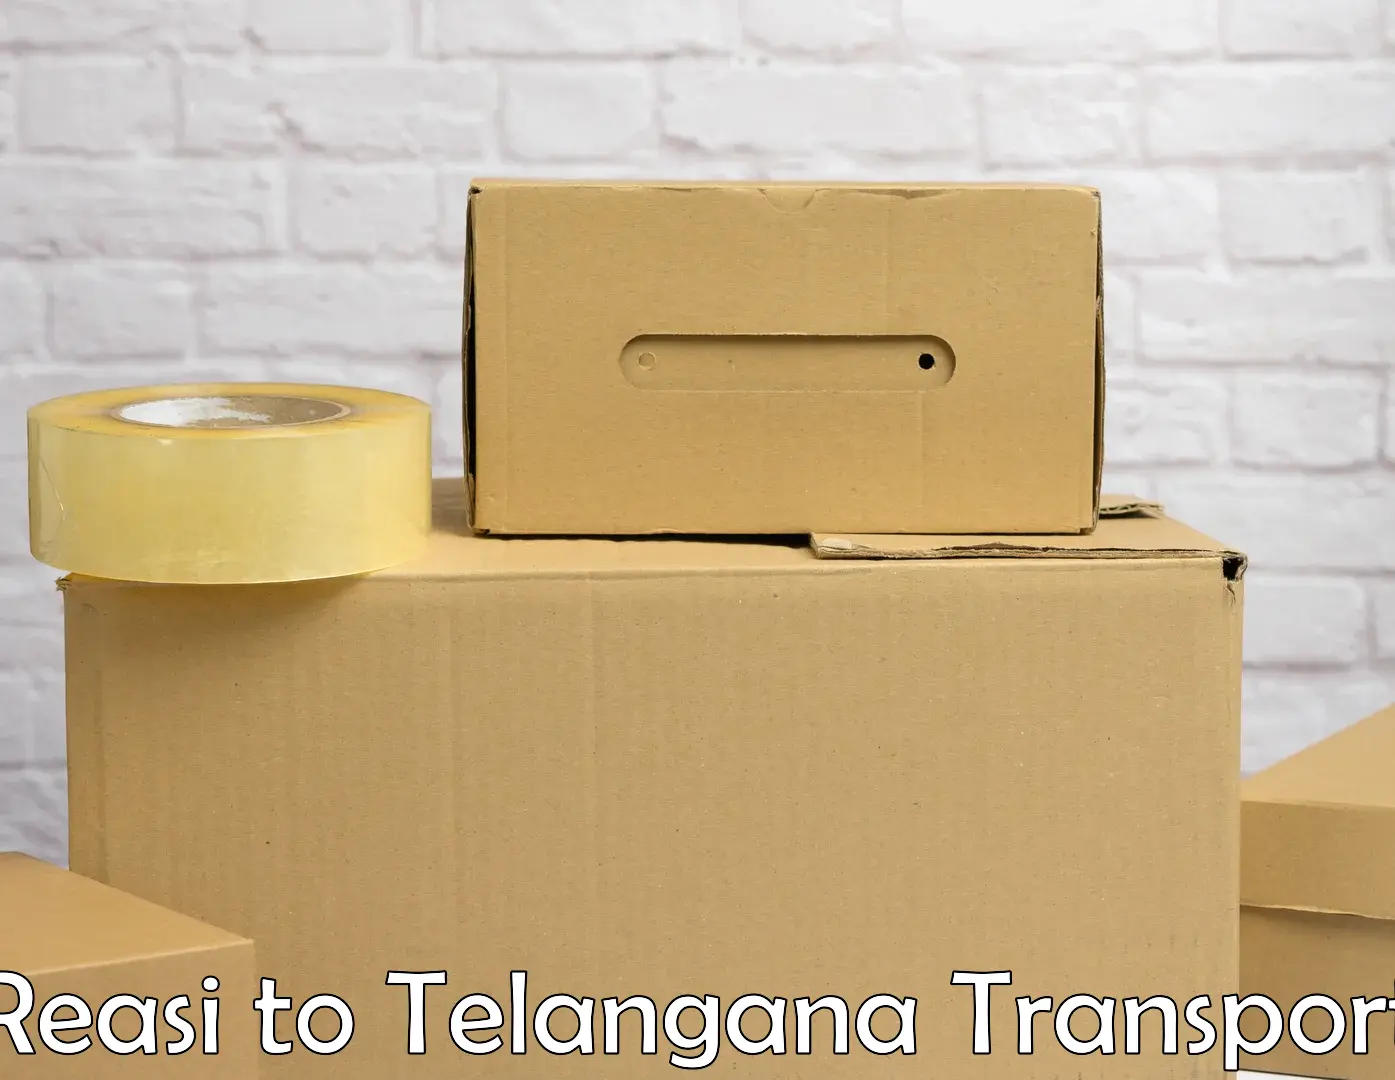 Domestic goods transportation services Reasi to Hyderabad